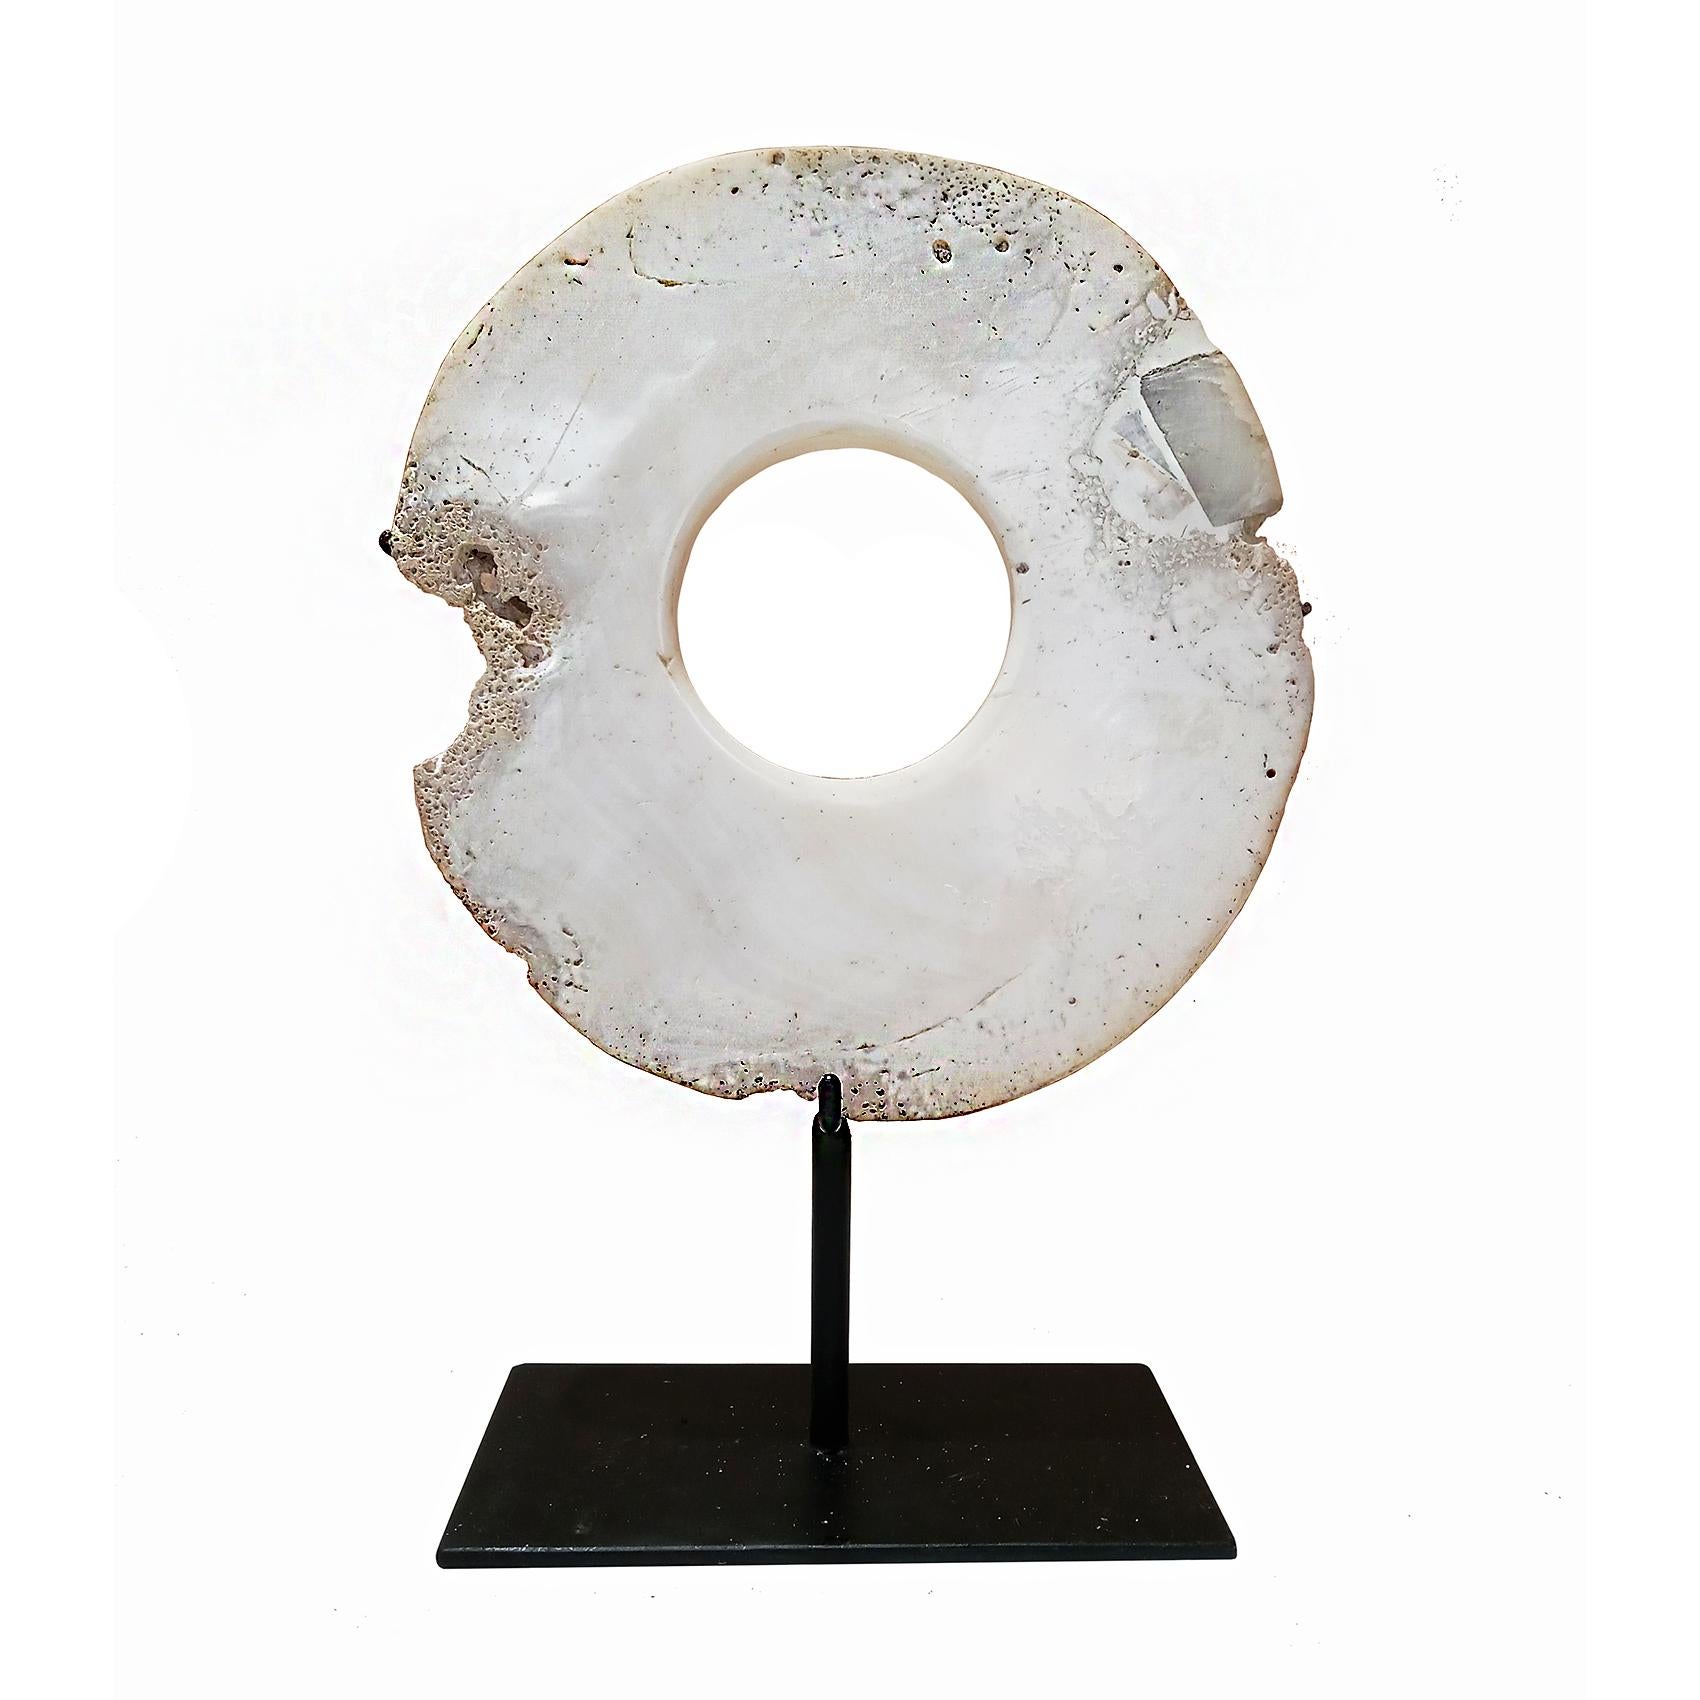 A beautiful stone disk, hand-carved in Indonesia. Mounted on a black metal stand. White stone, polished and shaped to resemble marble. 

7 inches diameter, 2.75 inches deep (stand base), 10 inches total height (mounted). 

Other stone disks from VW